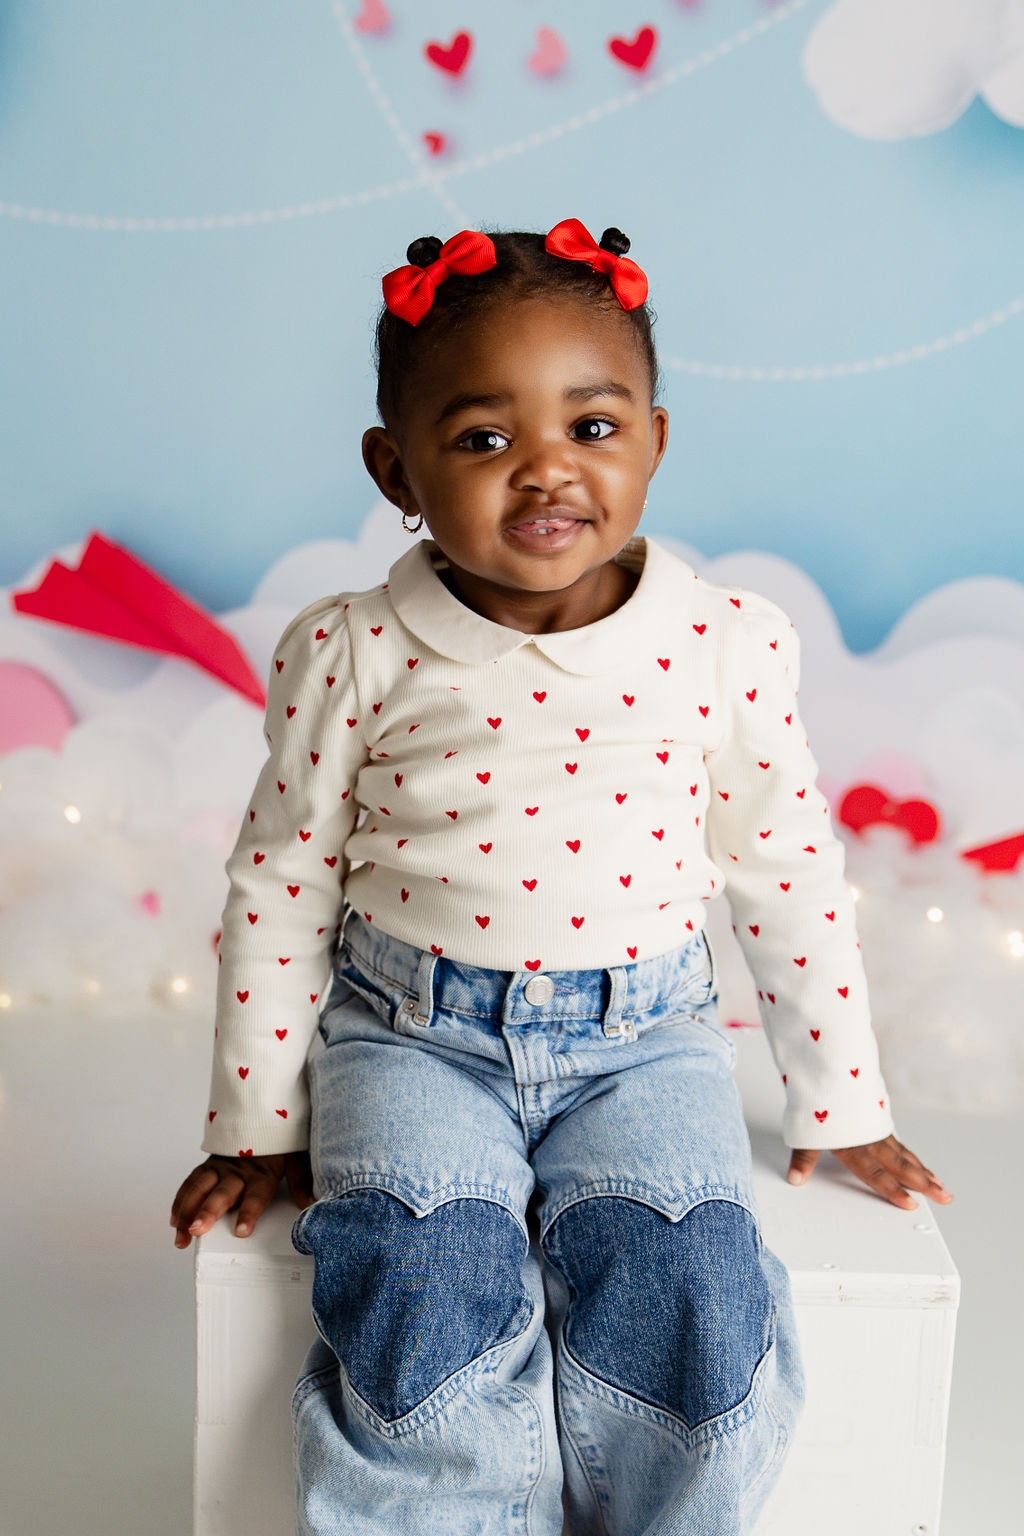 A young toddler girl in jeans and a white shirt with red hearts smiles while sitting on a wooden white box in a studio